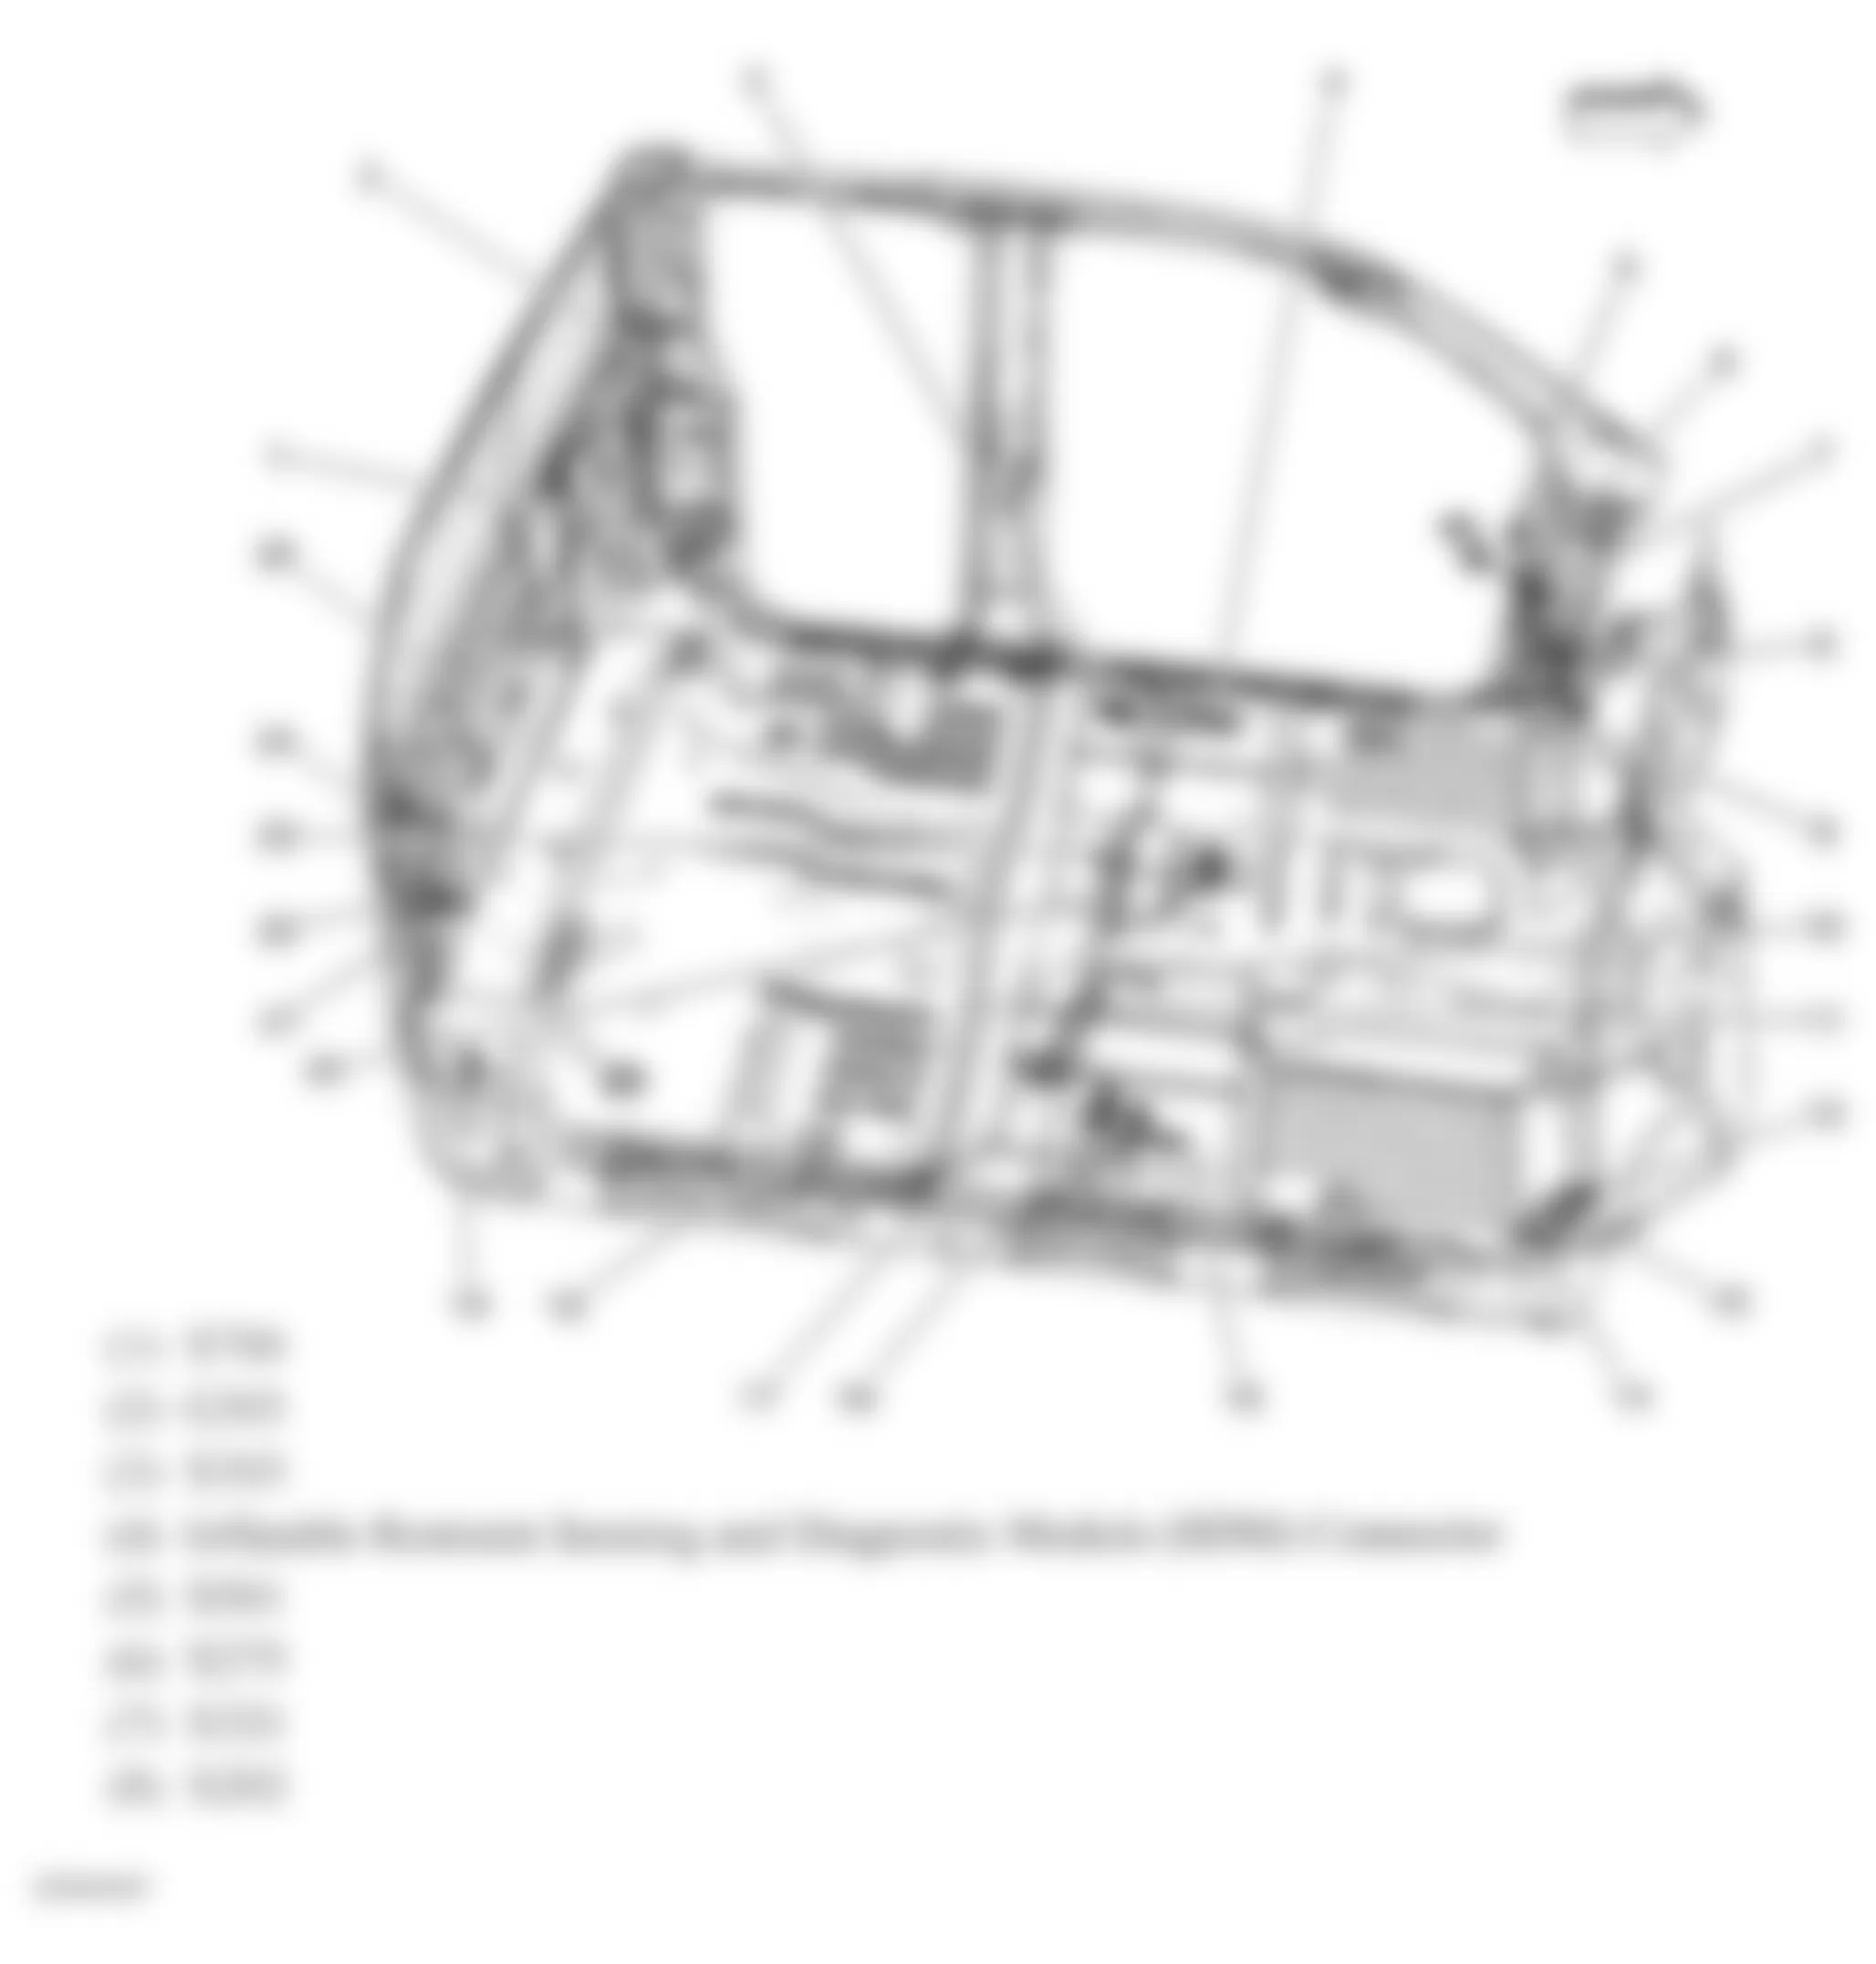 GMC Sierra 1500 2007 - Component Locations -  Passenger Compartment (Extended Cab) (1 Of 2)